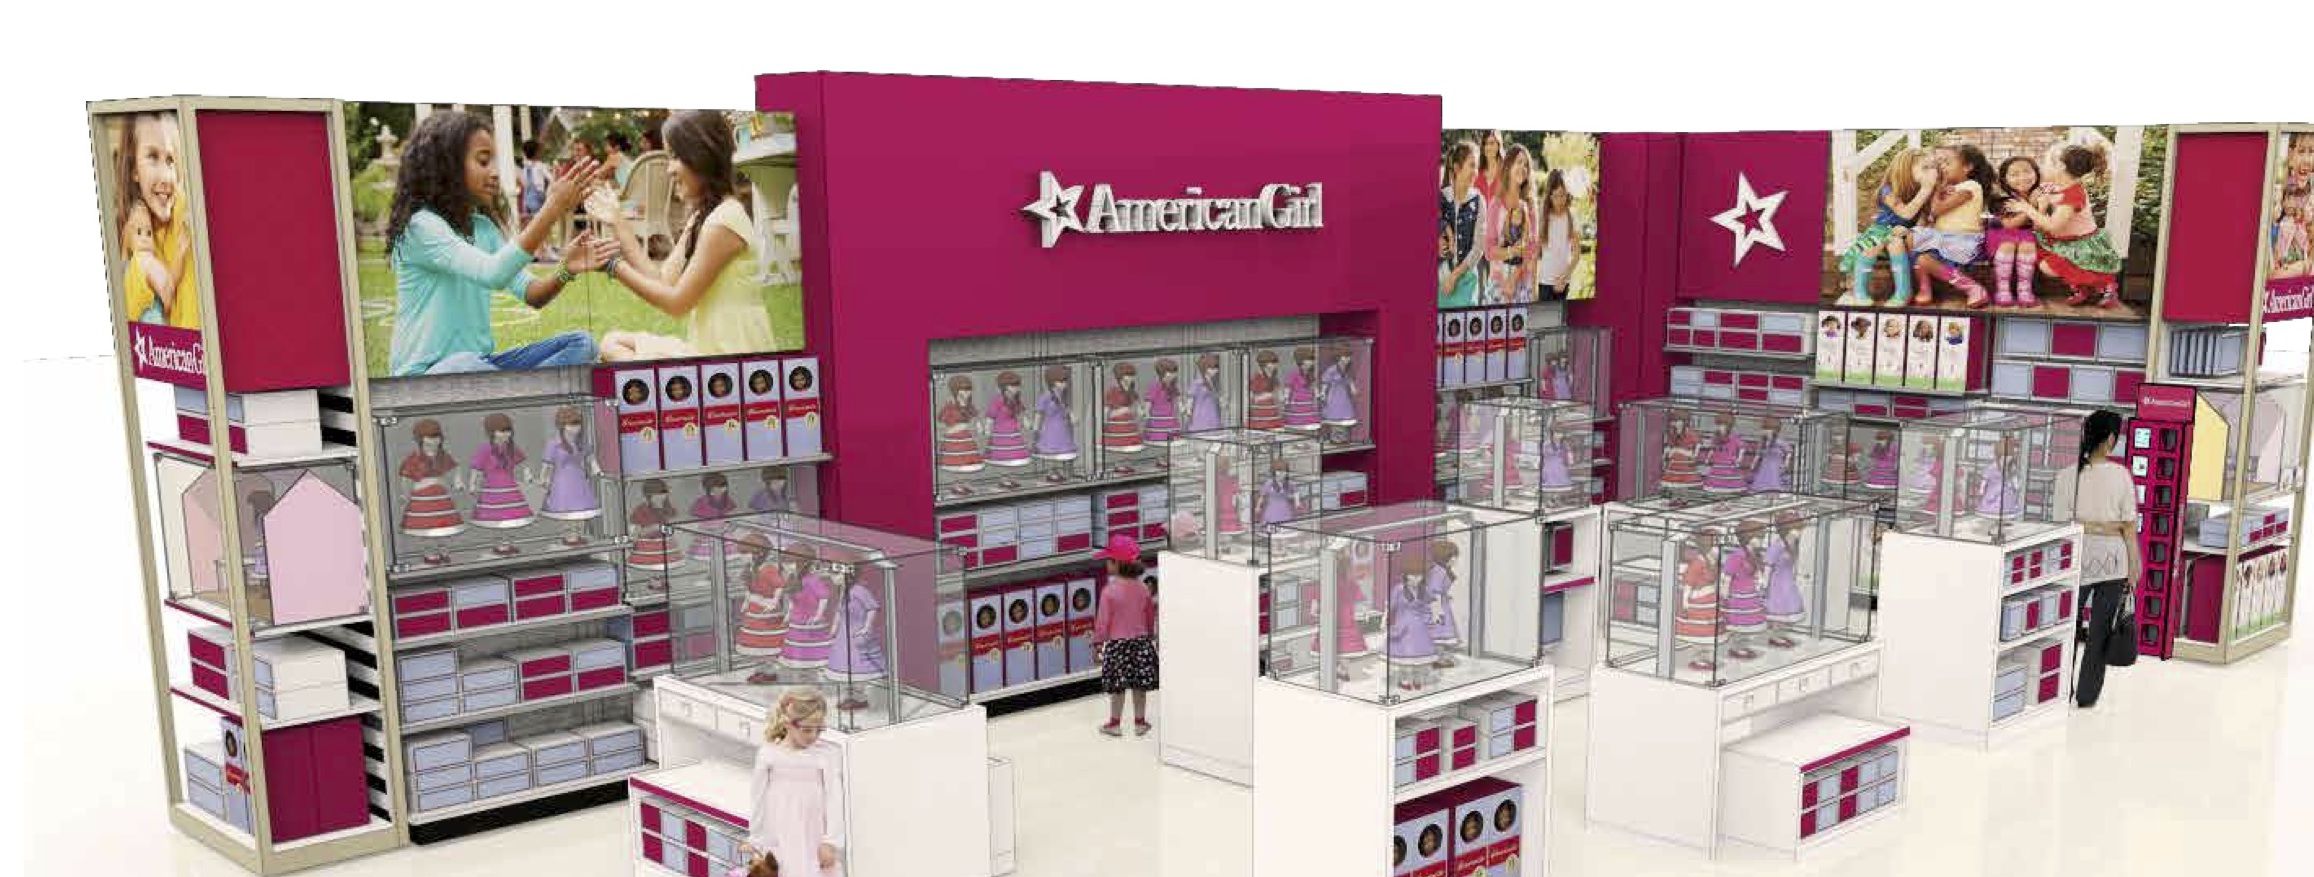 toys r us american girl knock off